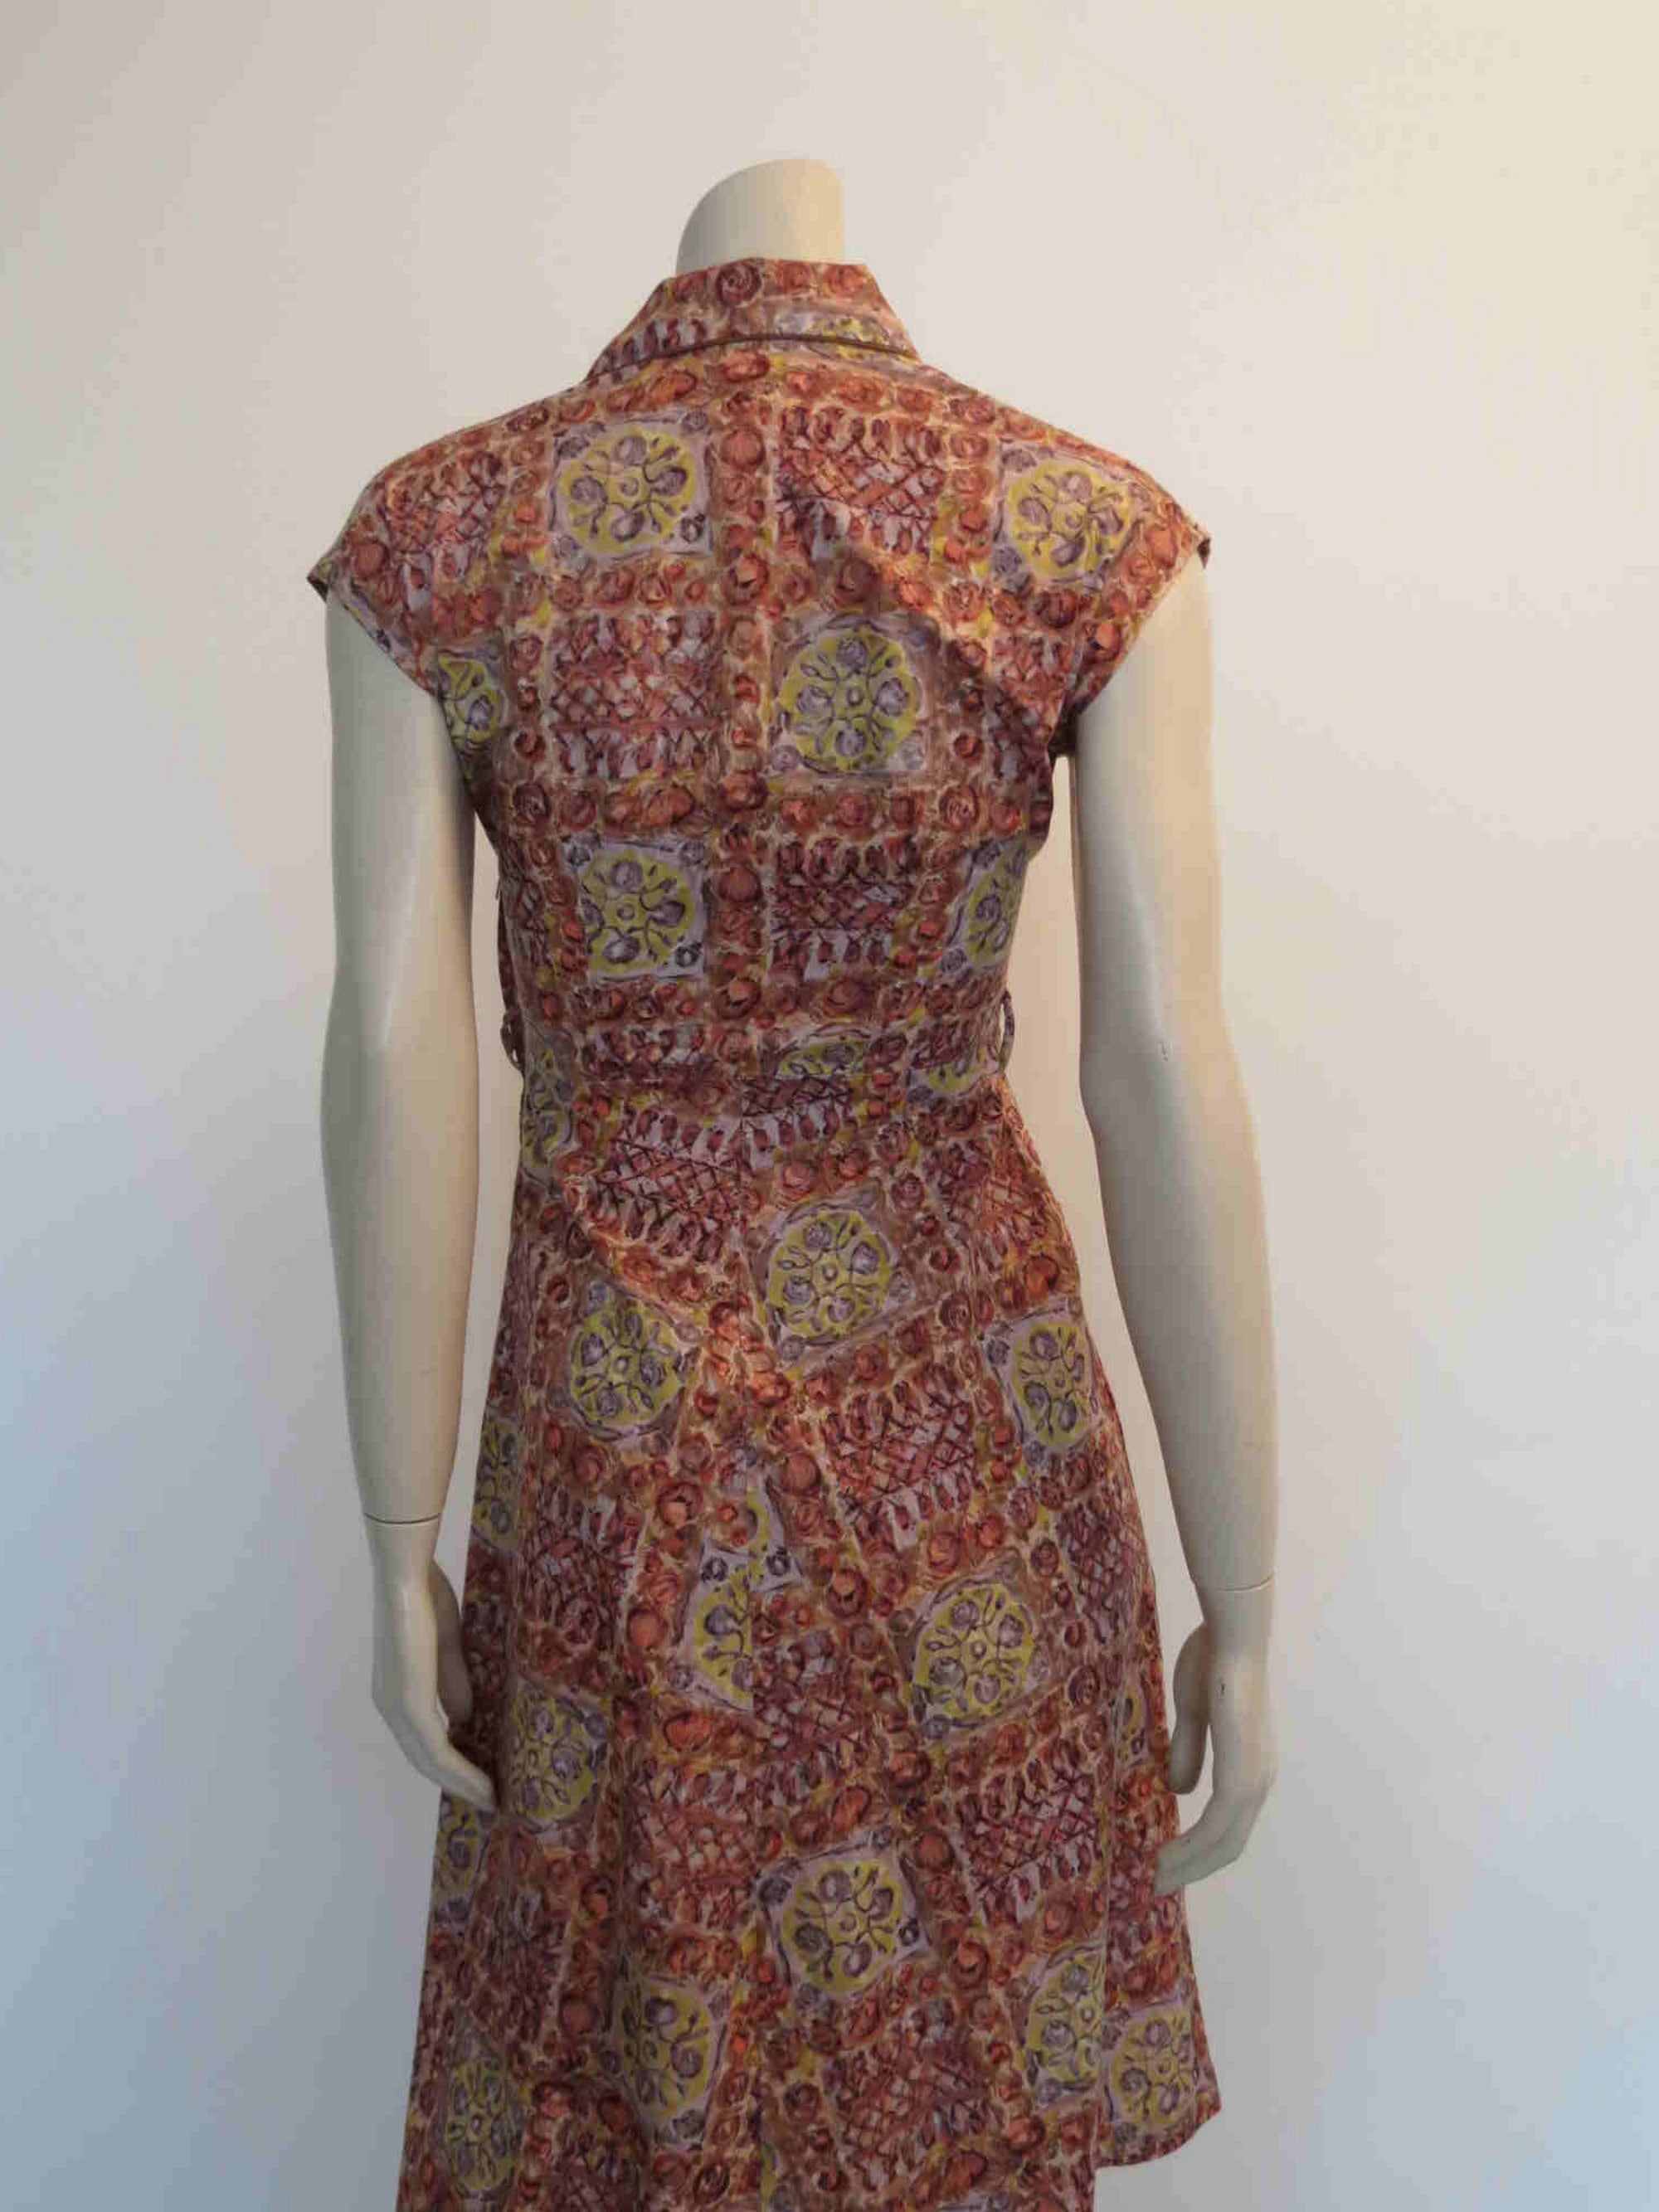 1950s vintage floral cotton dress with pockets